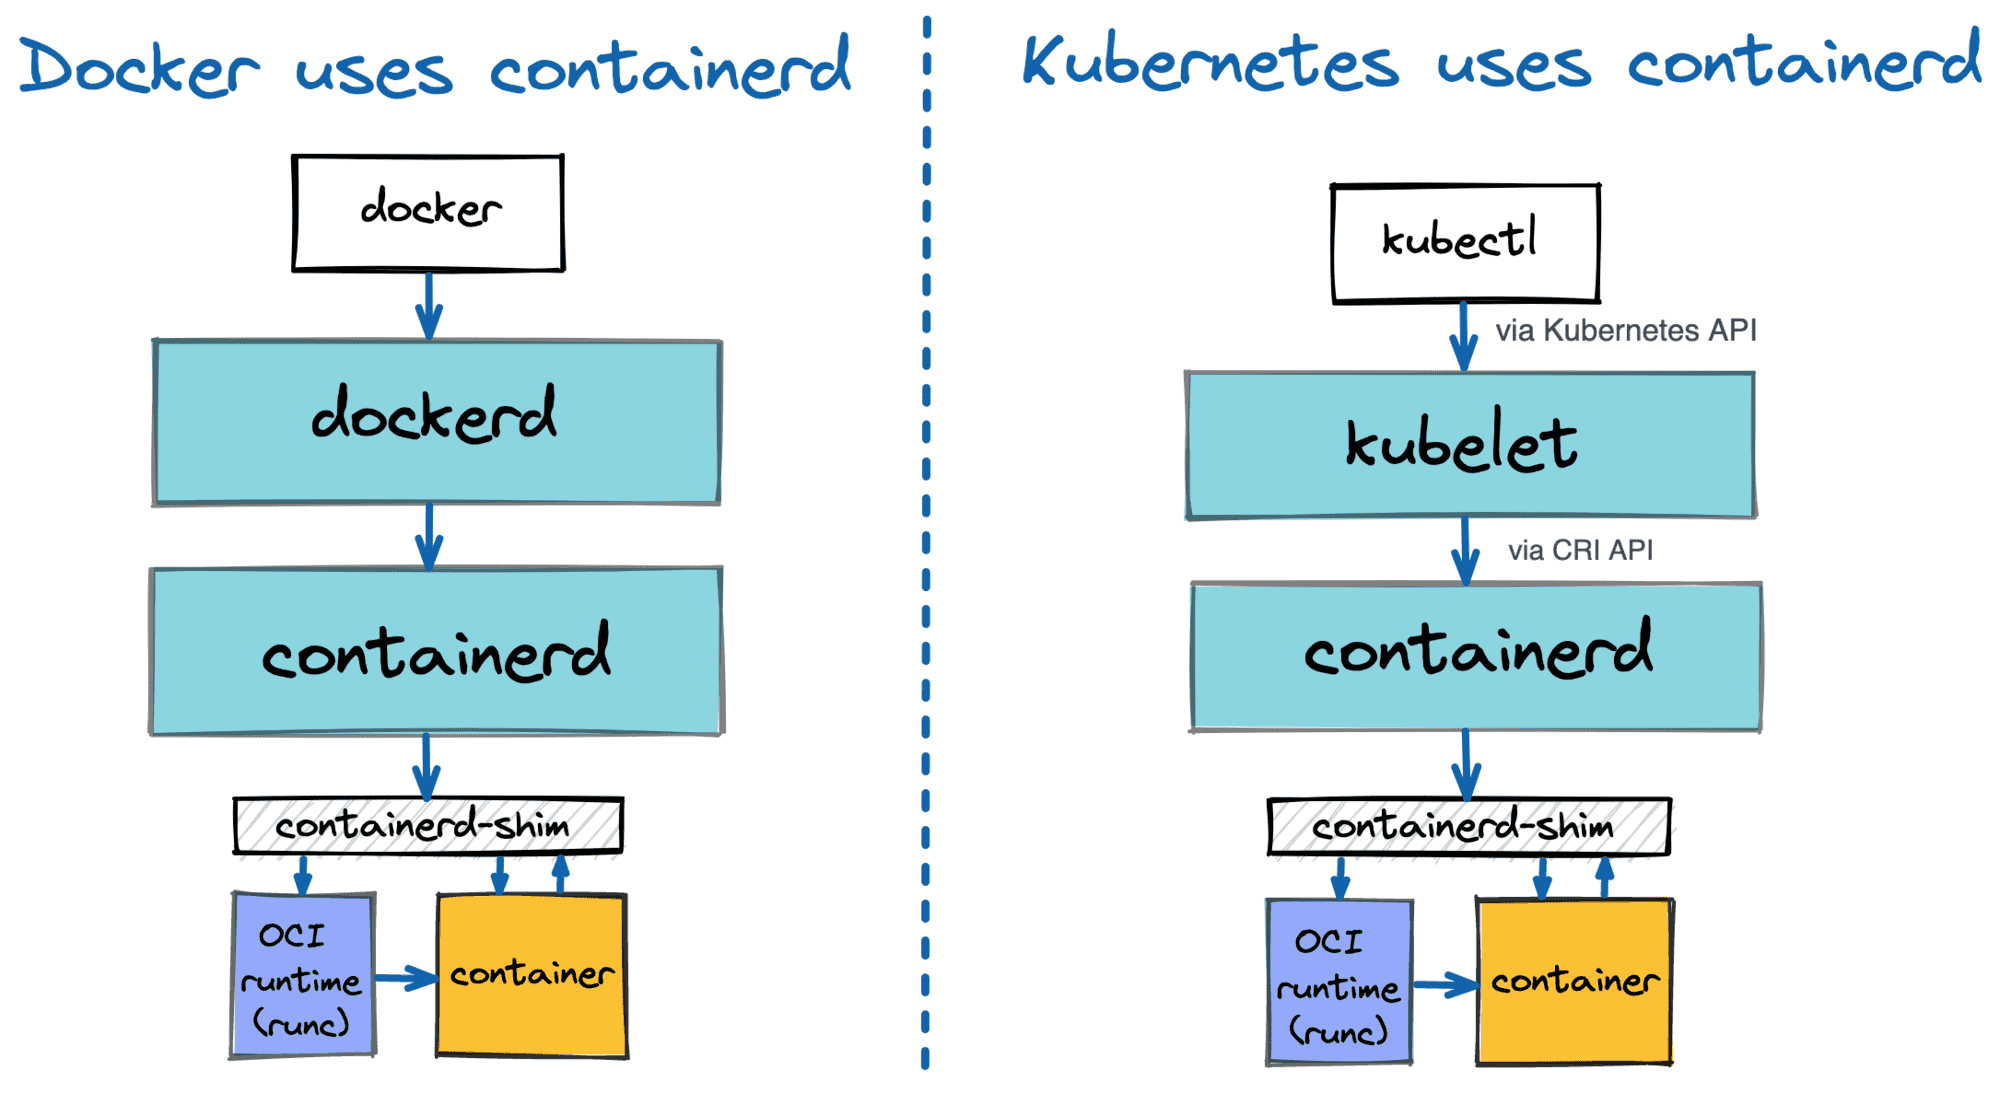 Docker and Kubernetes use containerd